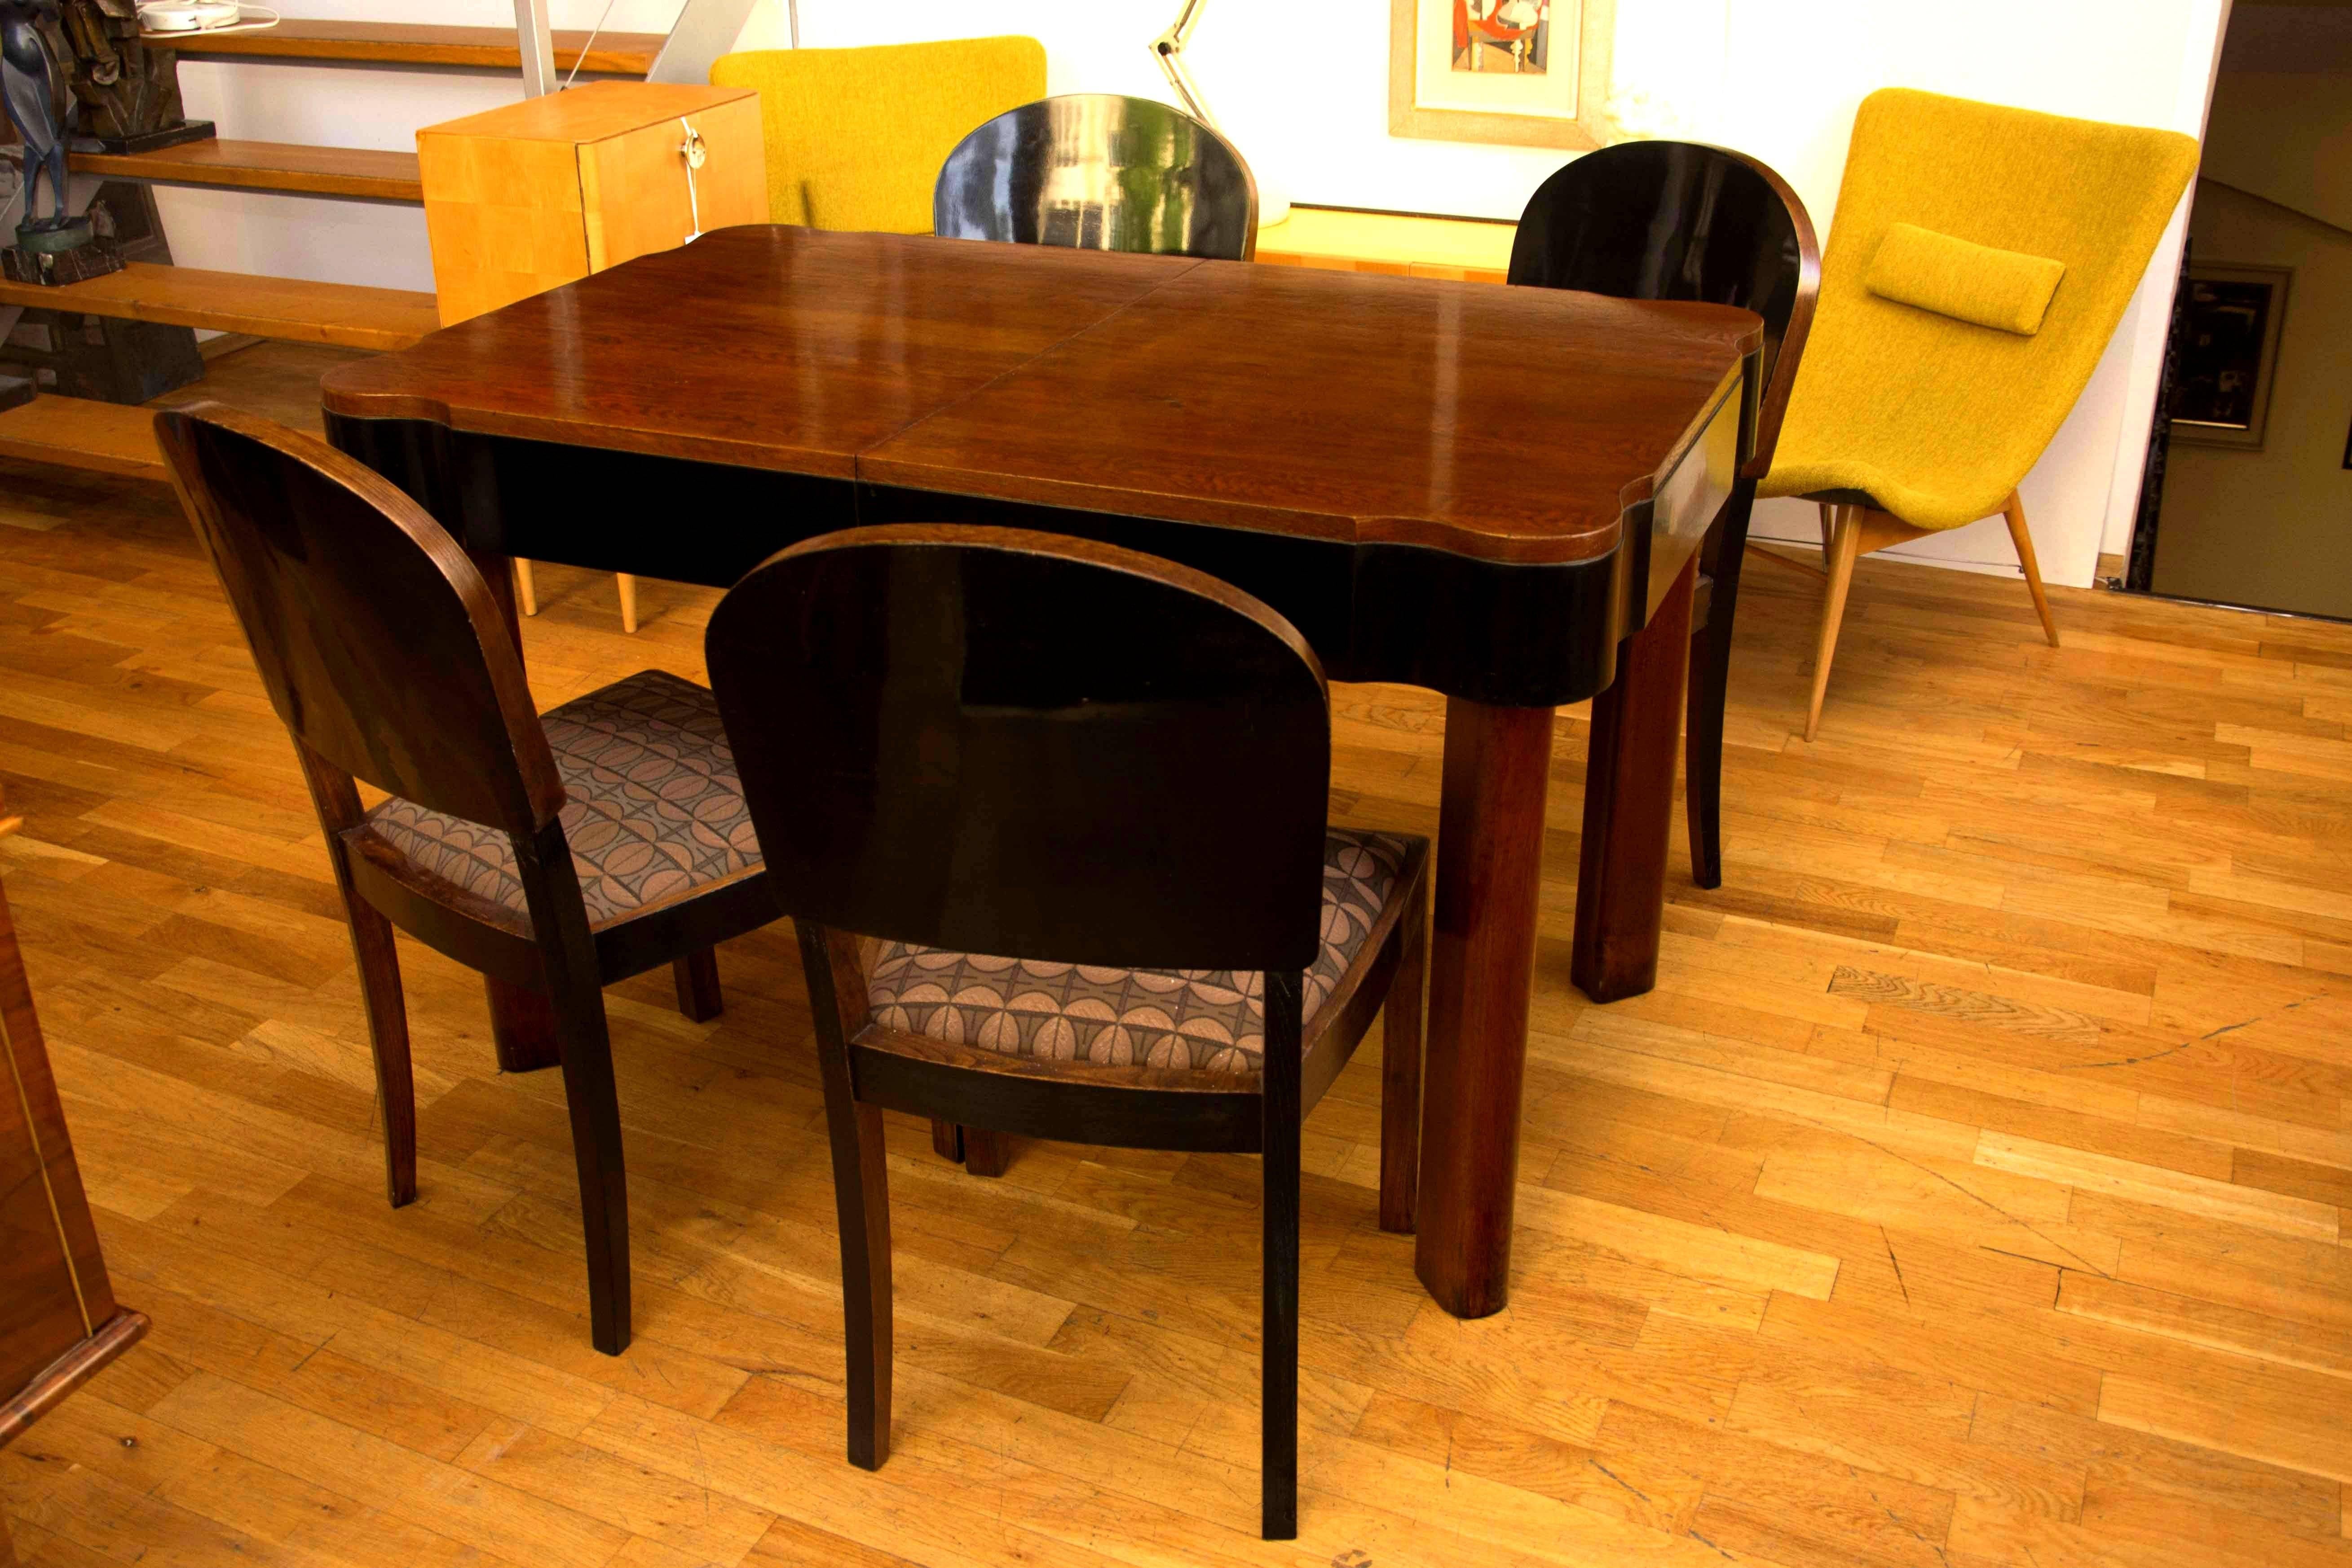 This very elegant dining set seats four people and features an adjustable oak dining table with four chairs. It has been made in Germany in the 1930s. The set has been professionally renovated; the wood has been polished to a high gloss using